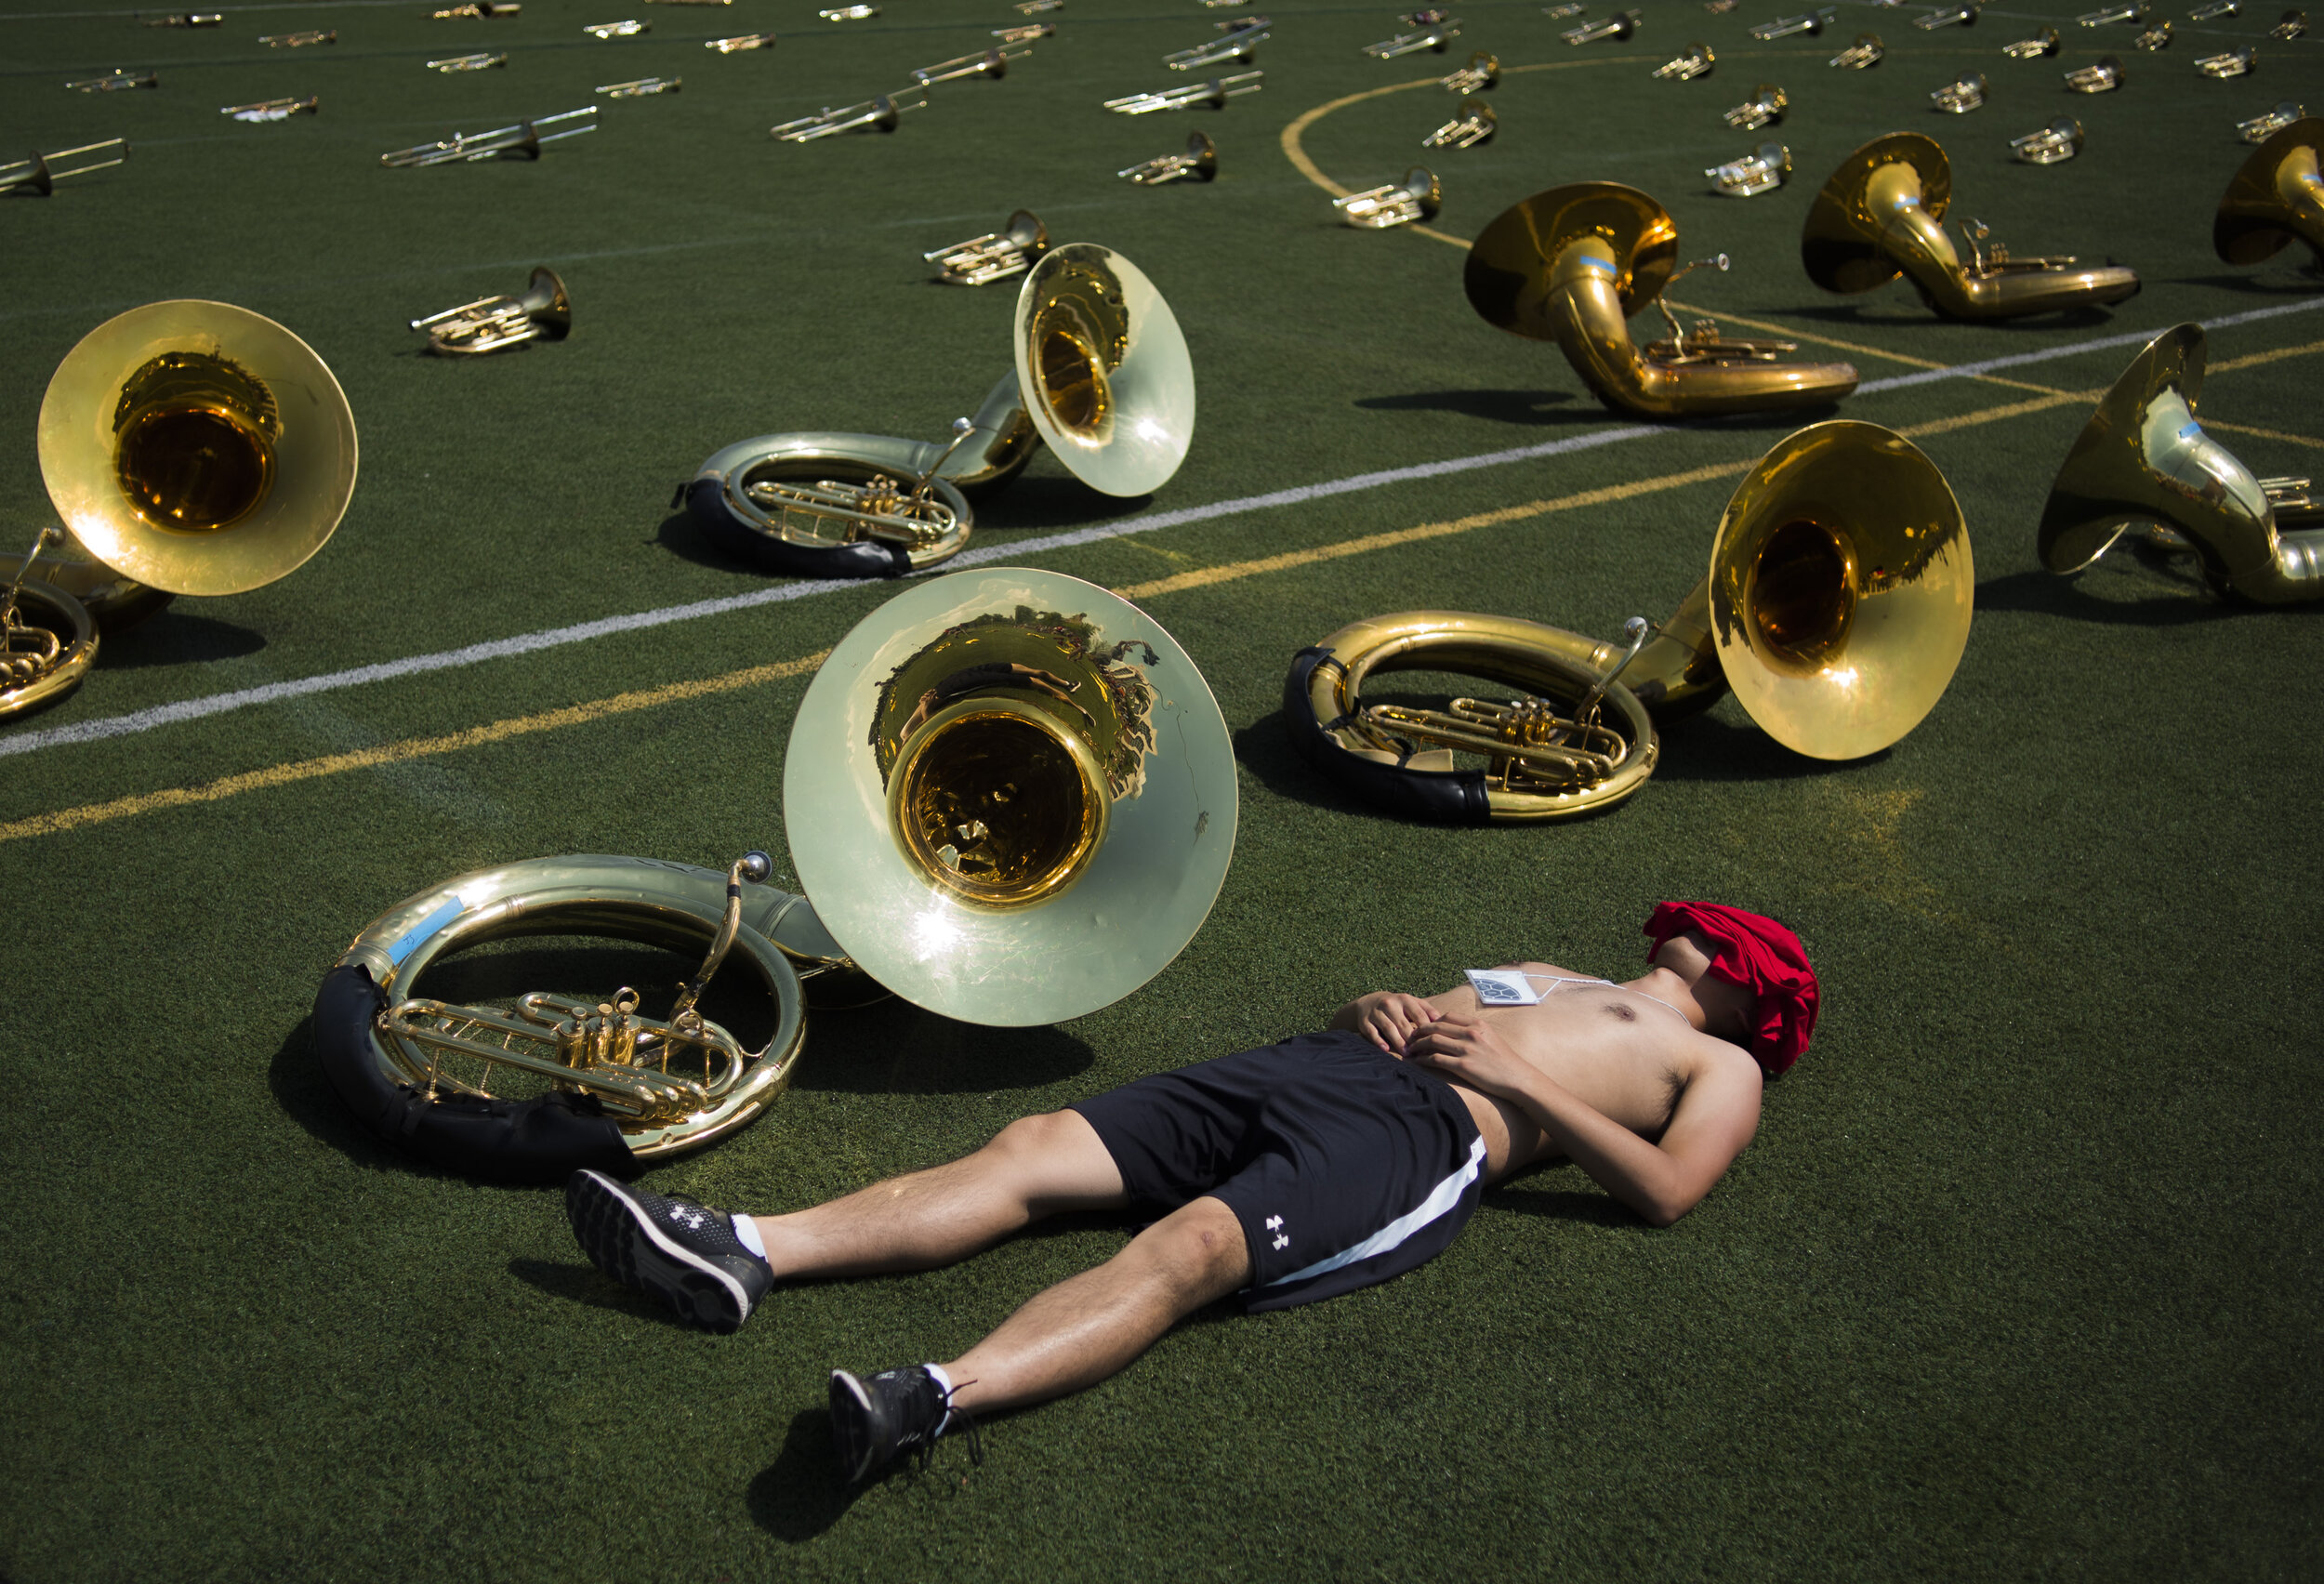  James Shen, a tuba player for the University of Maryland's marching band, spends his water break napping on the astroturf during the first week of rehearsals back after summer break on Tuesday, August 20, 2019.  